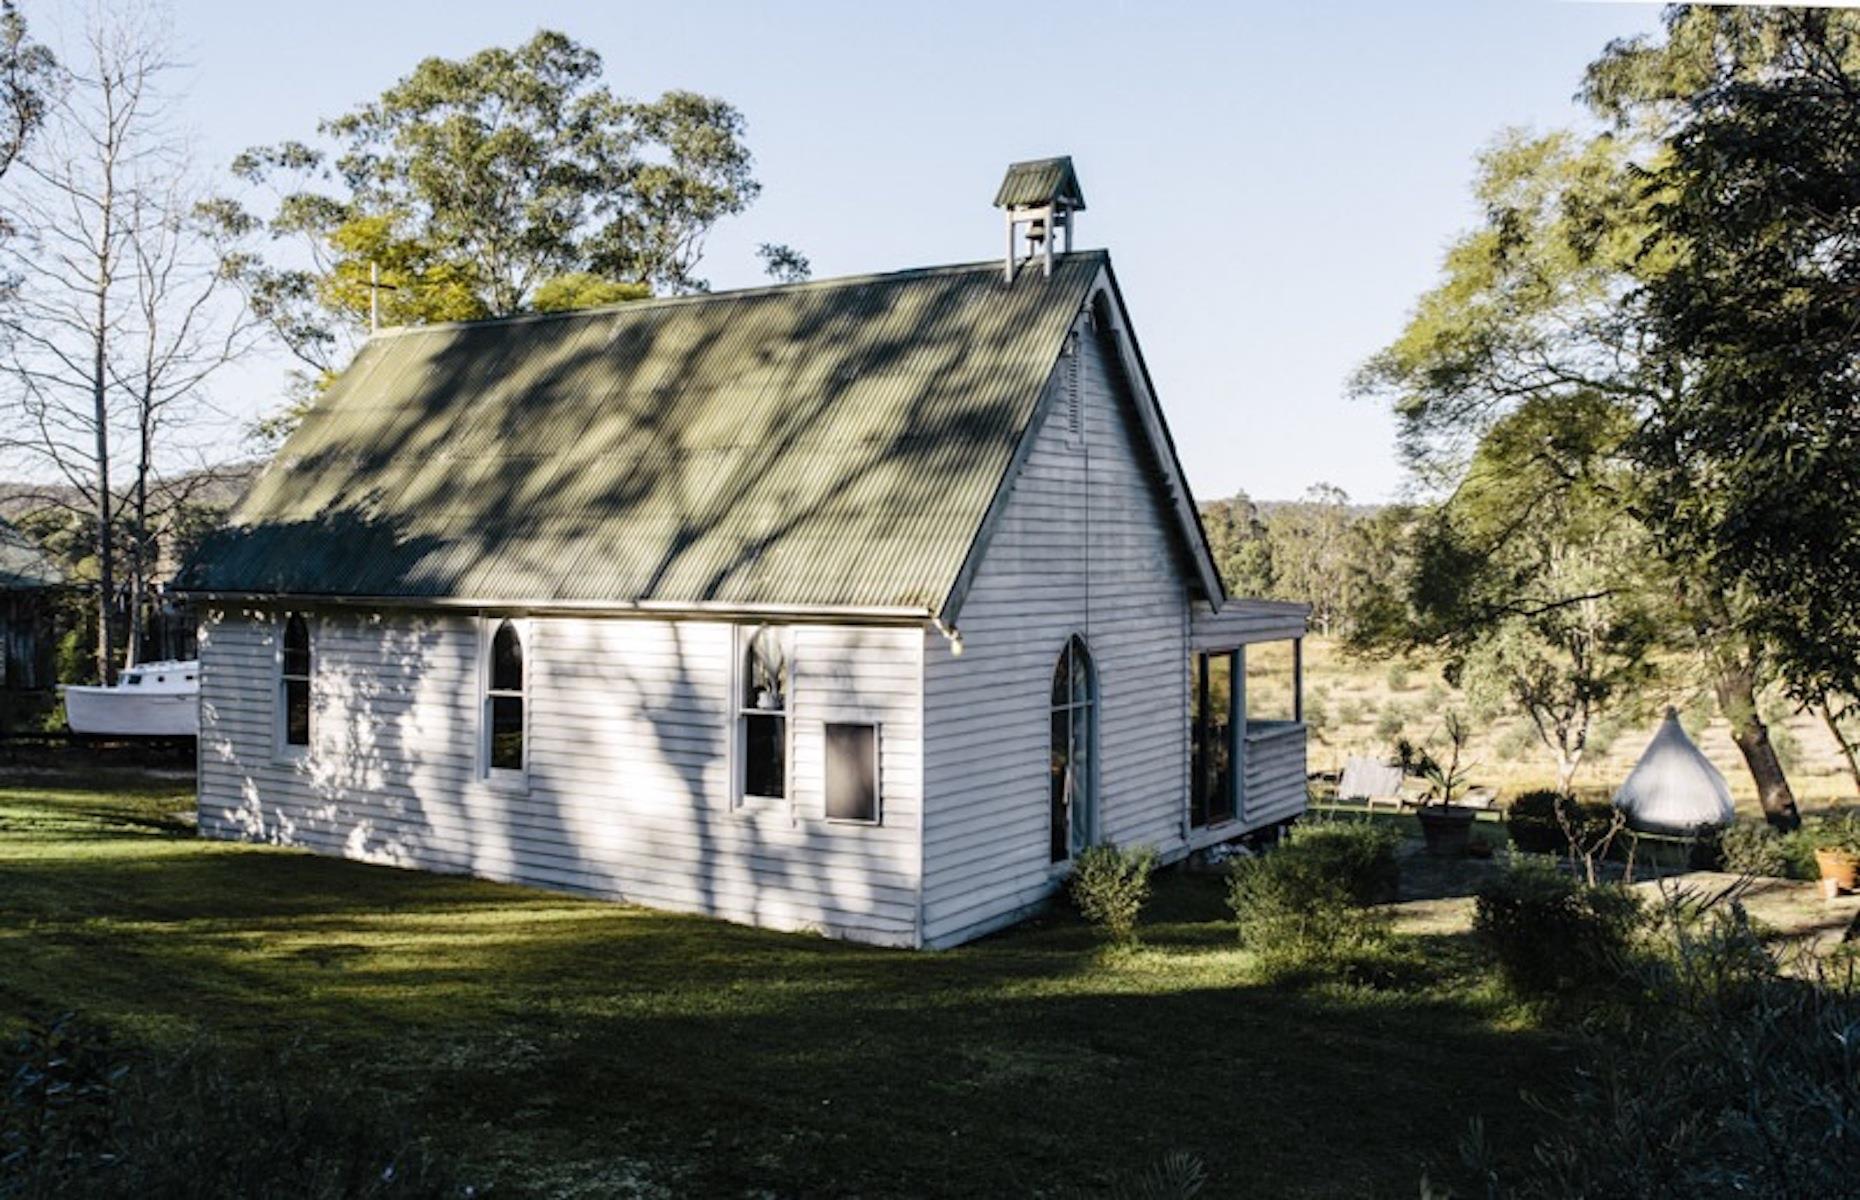 <p>A pretty 19th-century Anglican church on the banks of the Colo River in the Hawkesbury region has been thoughtfully converted into a super-cute, light-filled two-bed vacation cottage. <a href="https://www.airbnb.com.au/rooms/26583319">Available for bookings on Airbnb</a>, the little timber structure, which was consecrated in the 1880s, has a lovely terrace for peaceful contemplation. Inside many of the church's original features remain, including signs and wooden church pews that are now dining benches.</p>  <p><strong><a href="https://www.loveexploring.com/gallerylist/91142/australias-most-eerie-abandoned-buildings">These are Australia's most eerie abandoned buildings</a></strong></p>